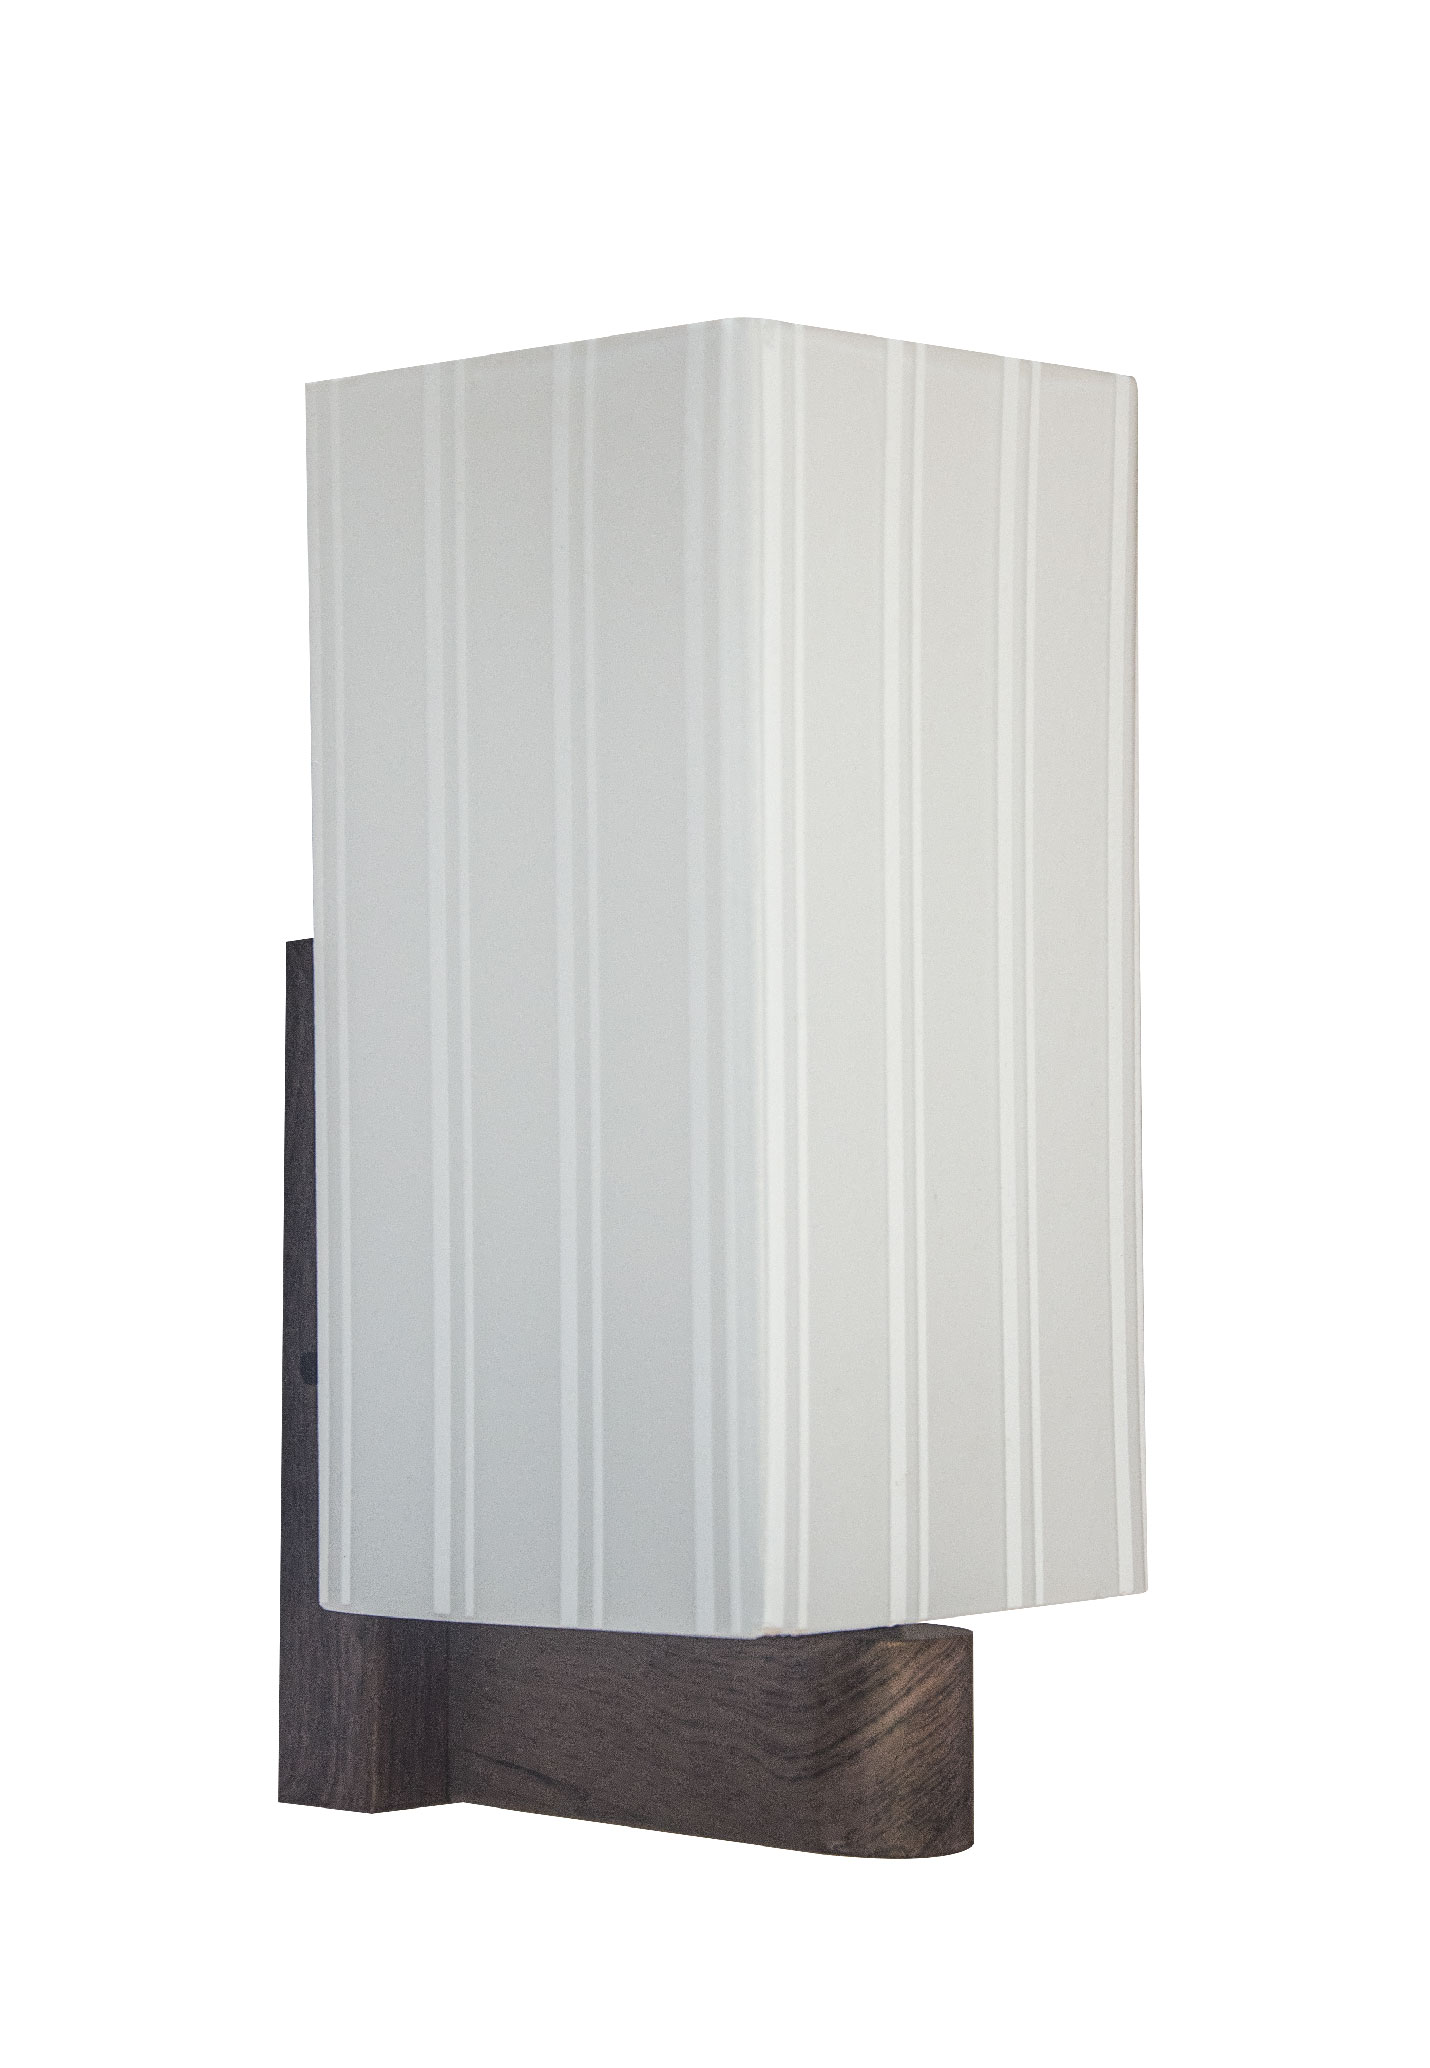 Indoor wall light Bella GBL 1 ( E27 Holder ) ( Without Lamp )